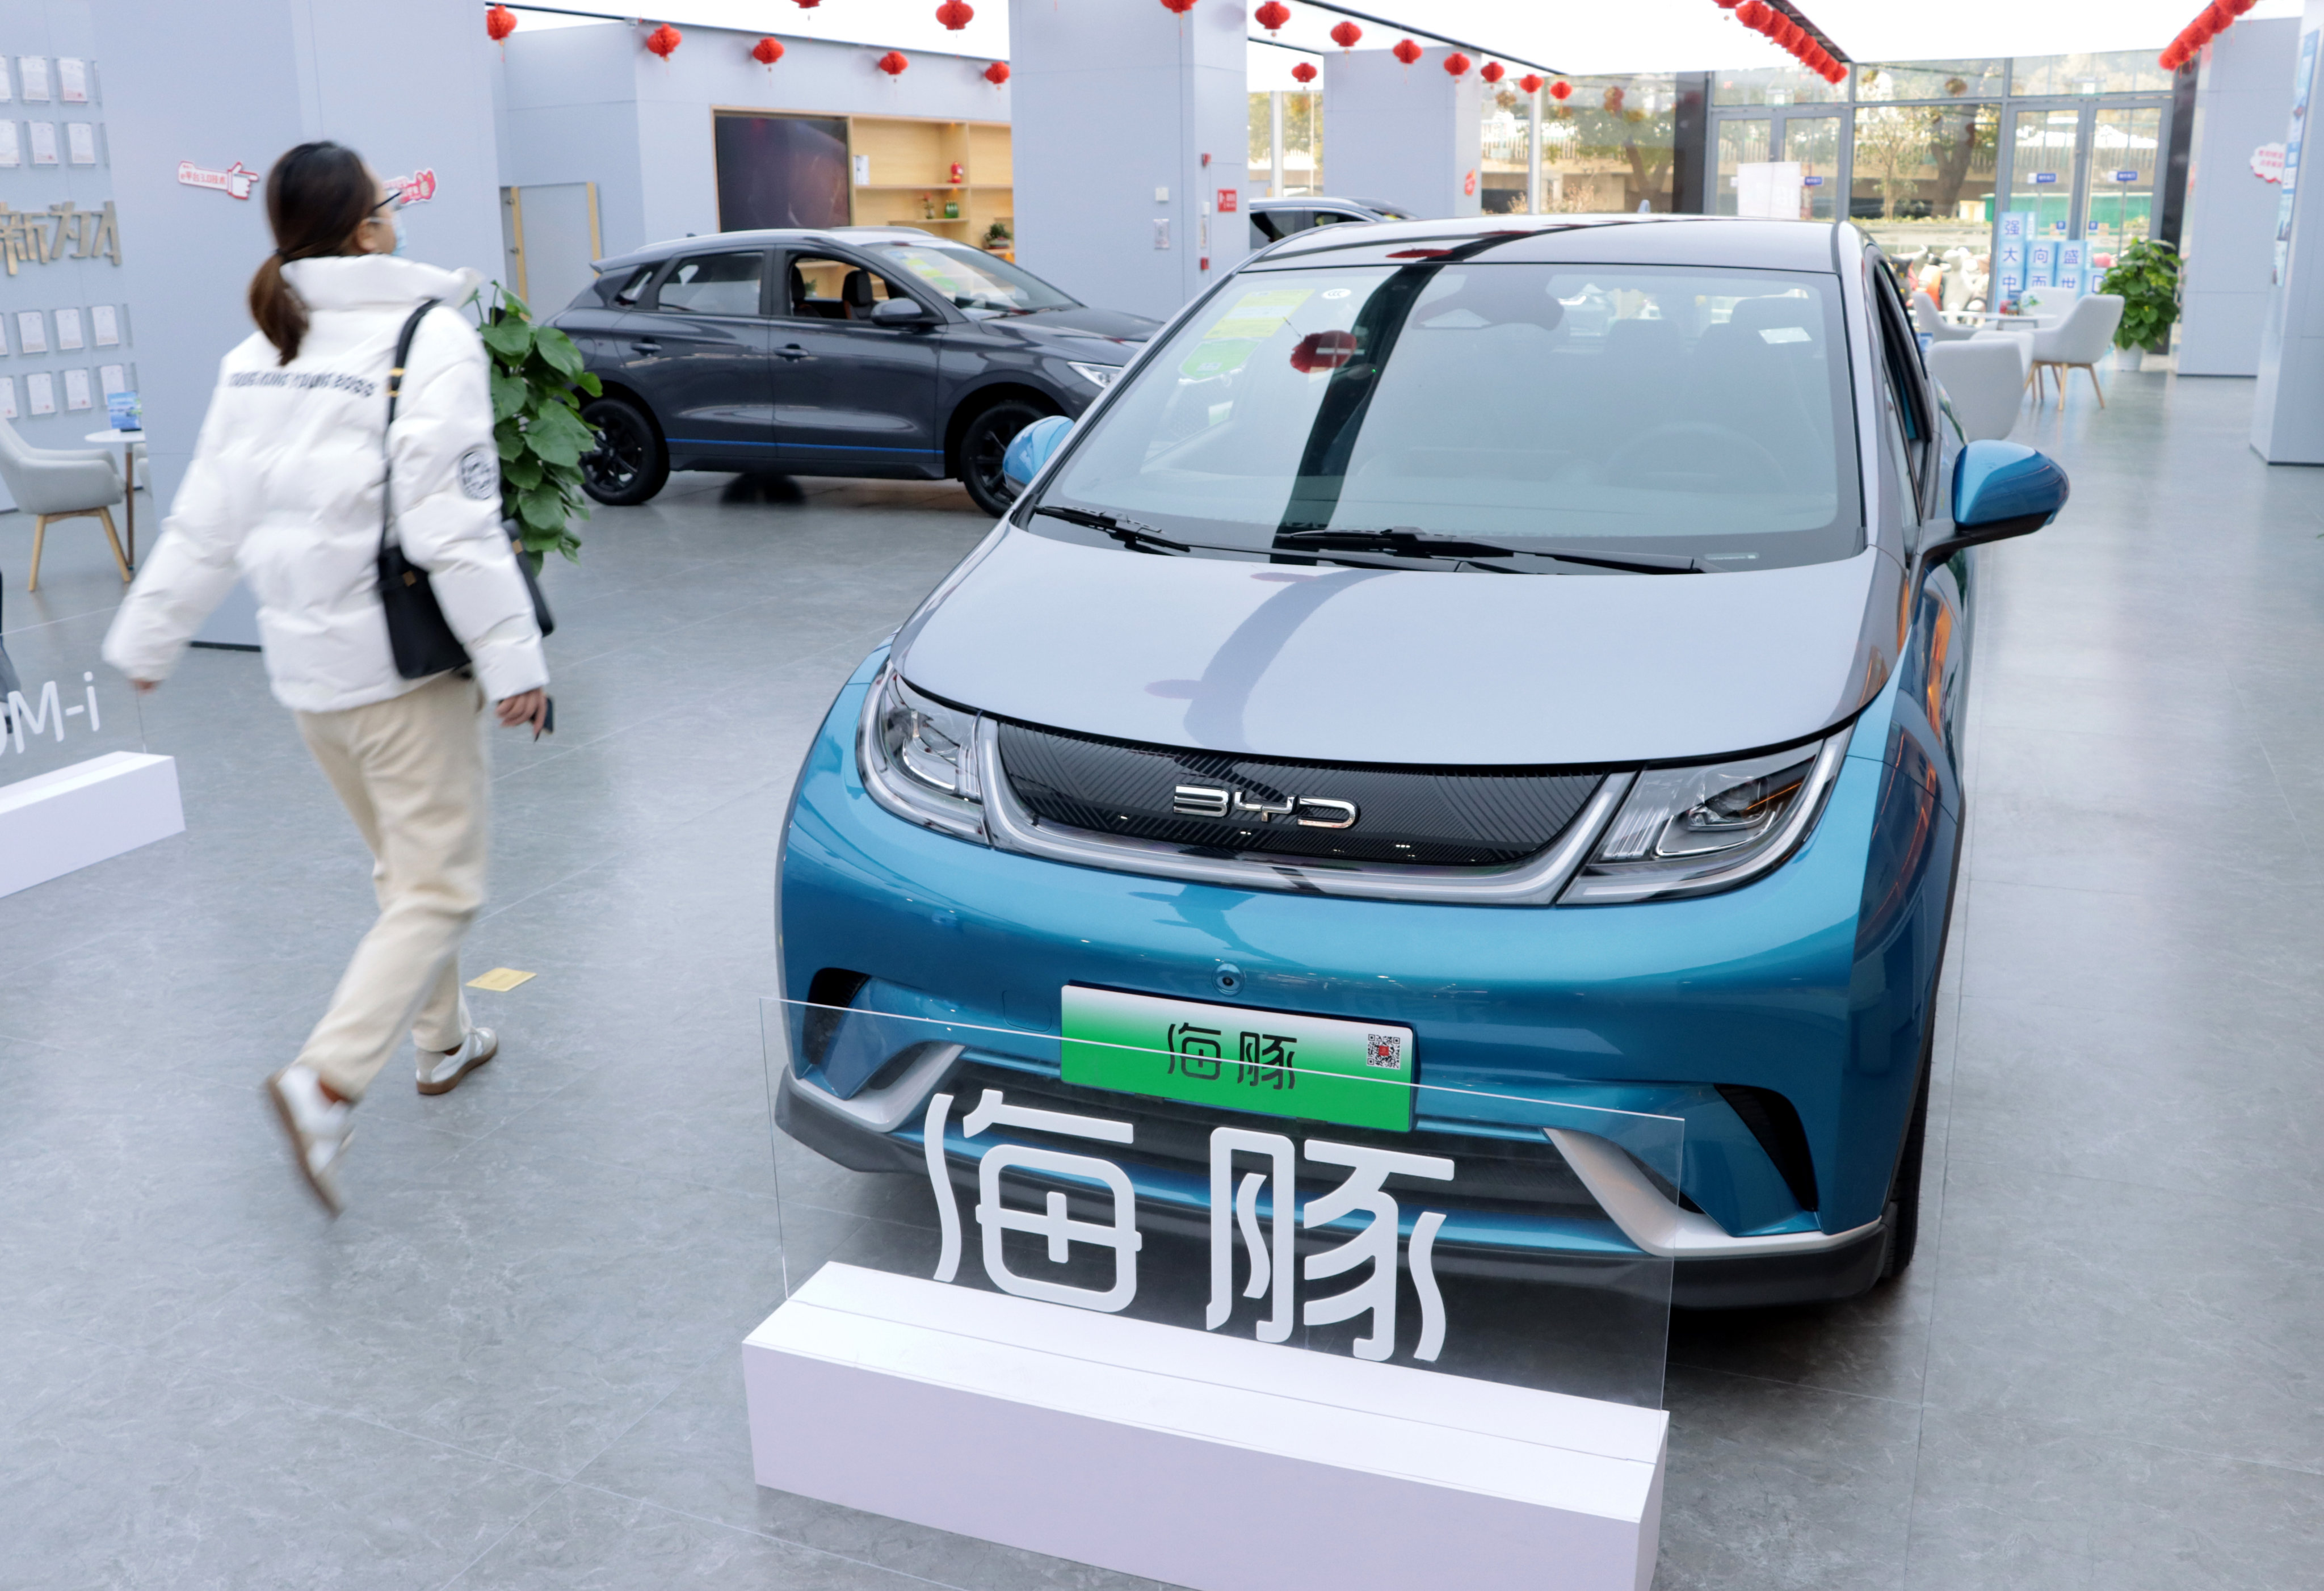 BYD’s Dolphin electric vehicle is displayed at a showroom in Changzhou, in China’s Jiangsu province. Photo: VCG via Getty Images